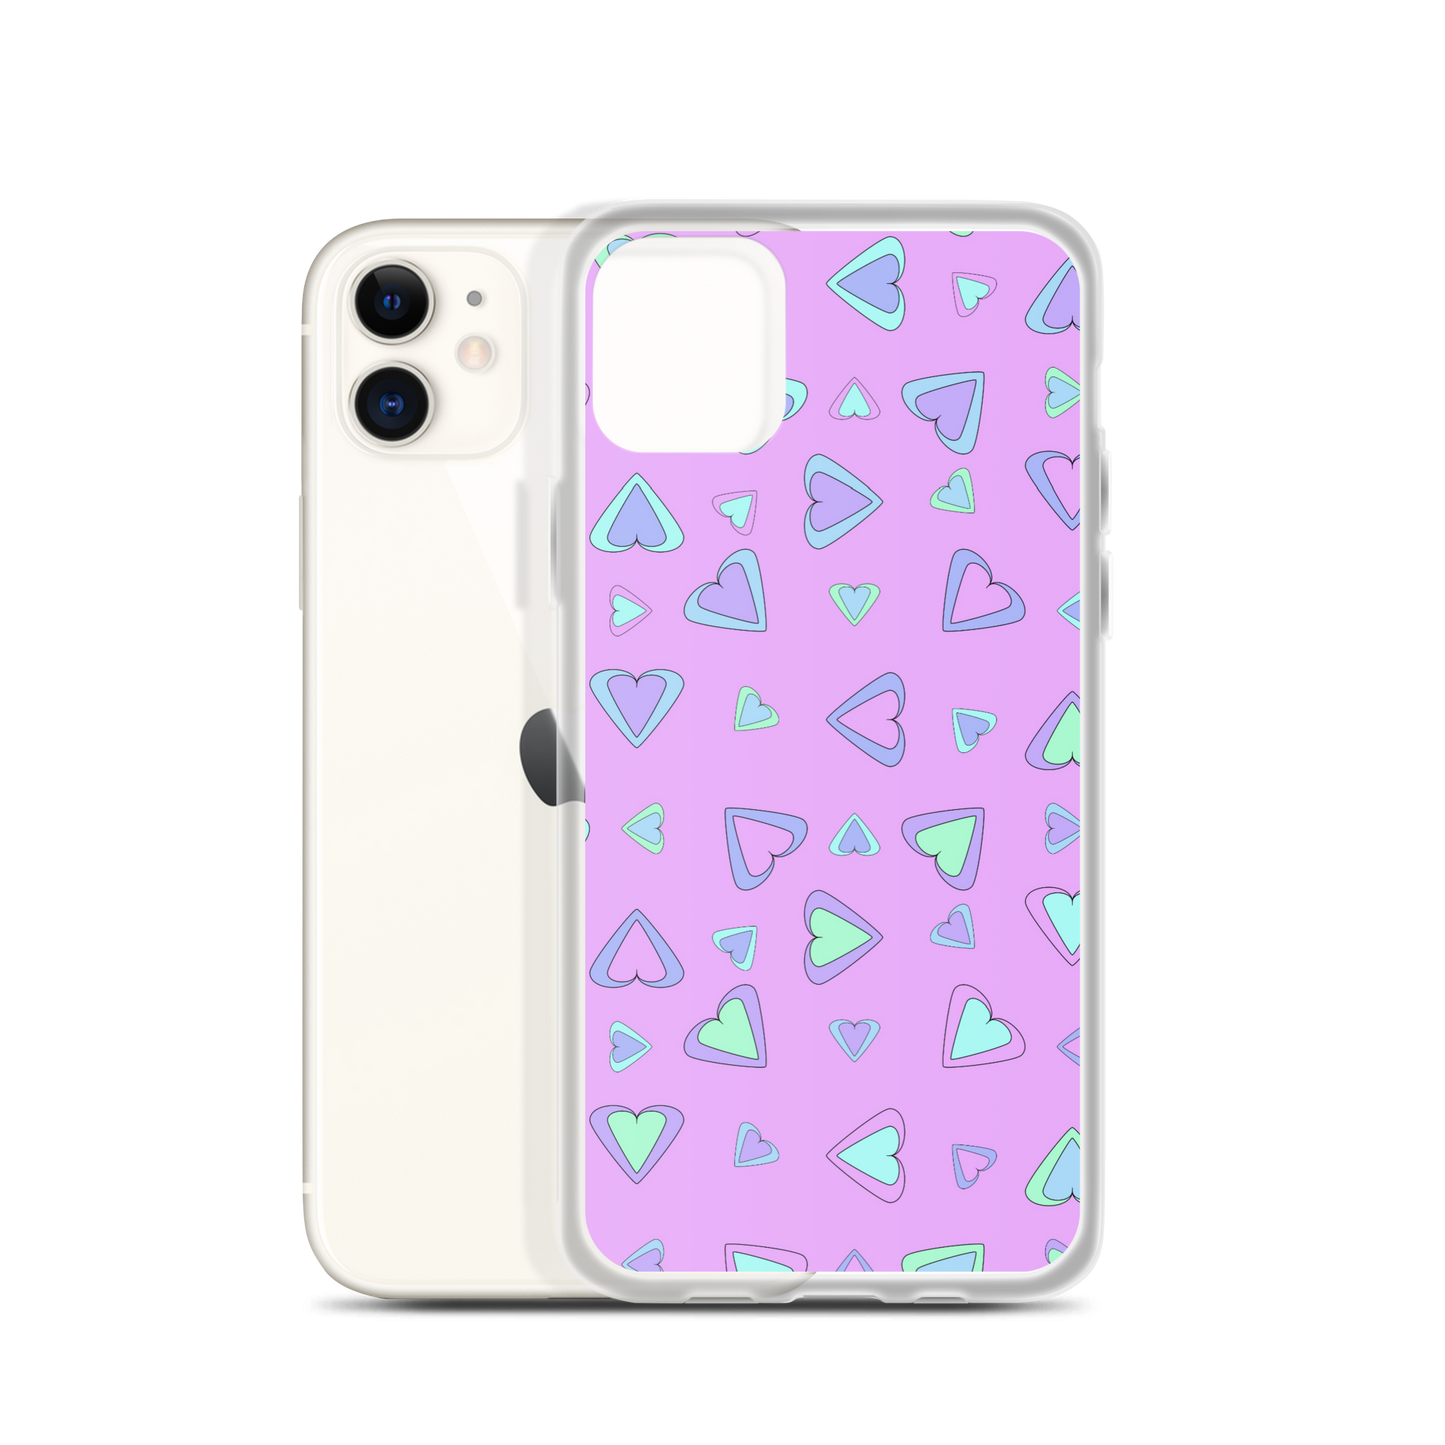 Rainbow Of Hearts | Batch 01 | Seamless Patterns | iPhone Case - #5